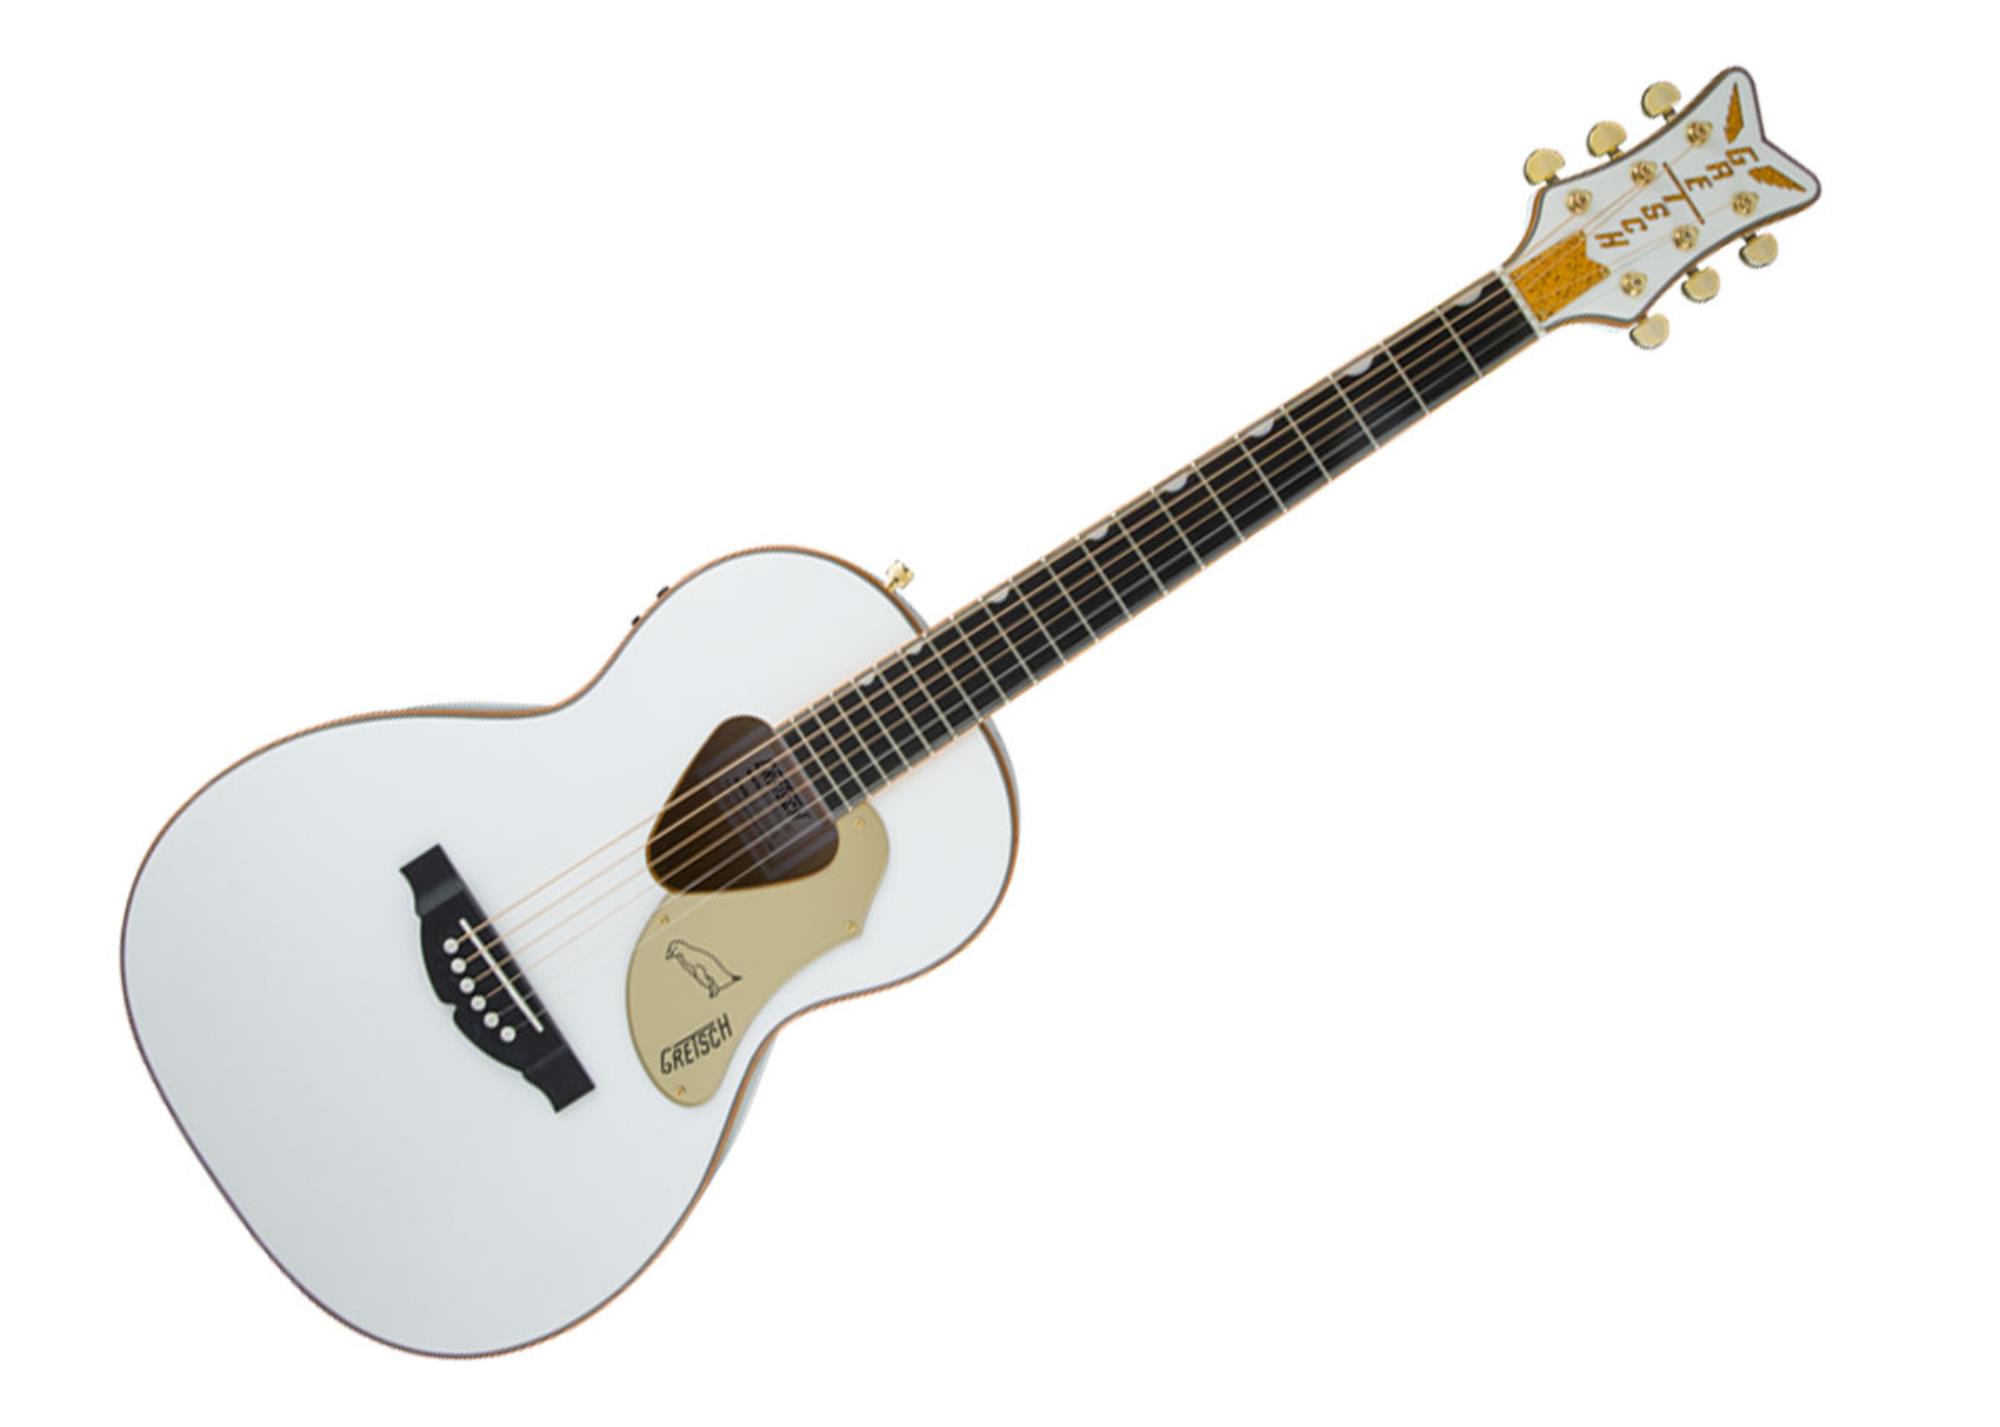 GRETSCH-G5021WPE-Rancher-Penguin-Parlor-Acoustic-Electric-White-2714014505-sku-24854